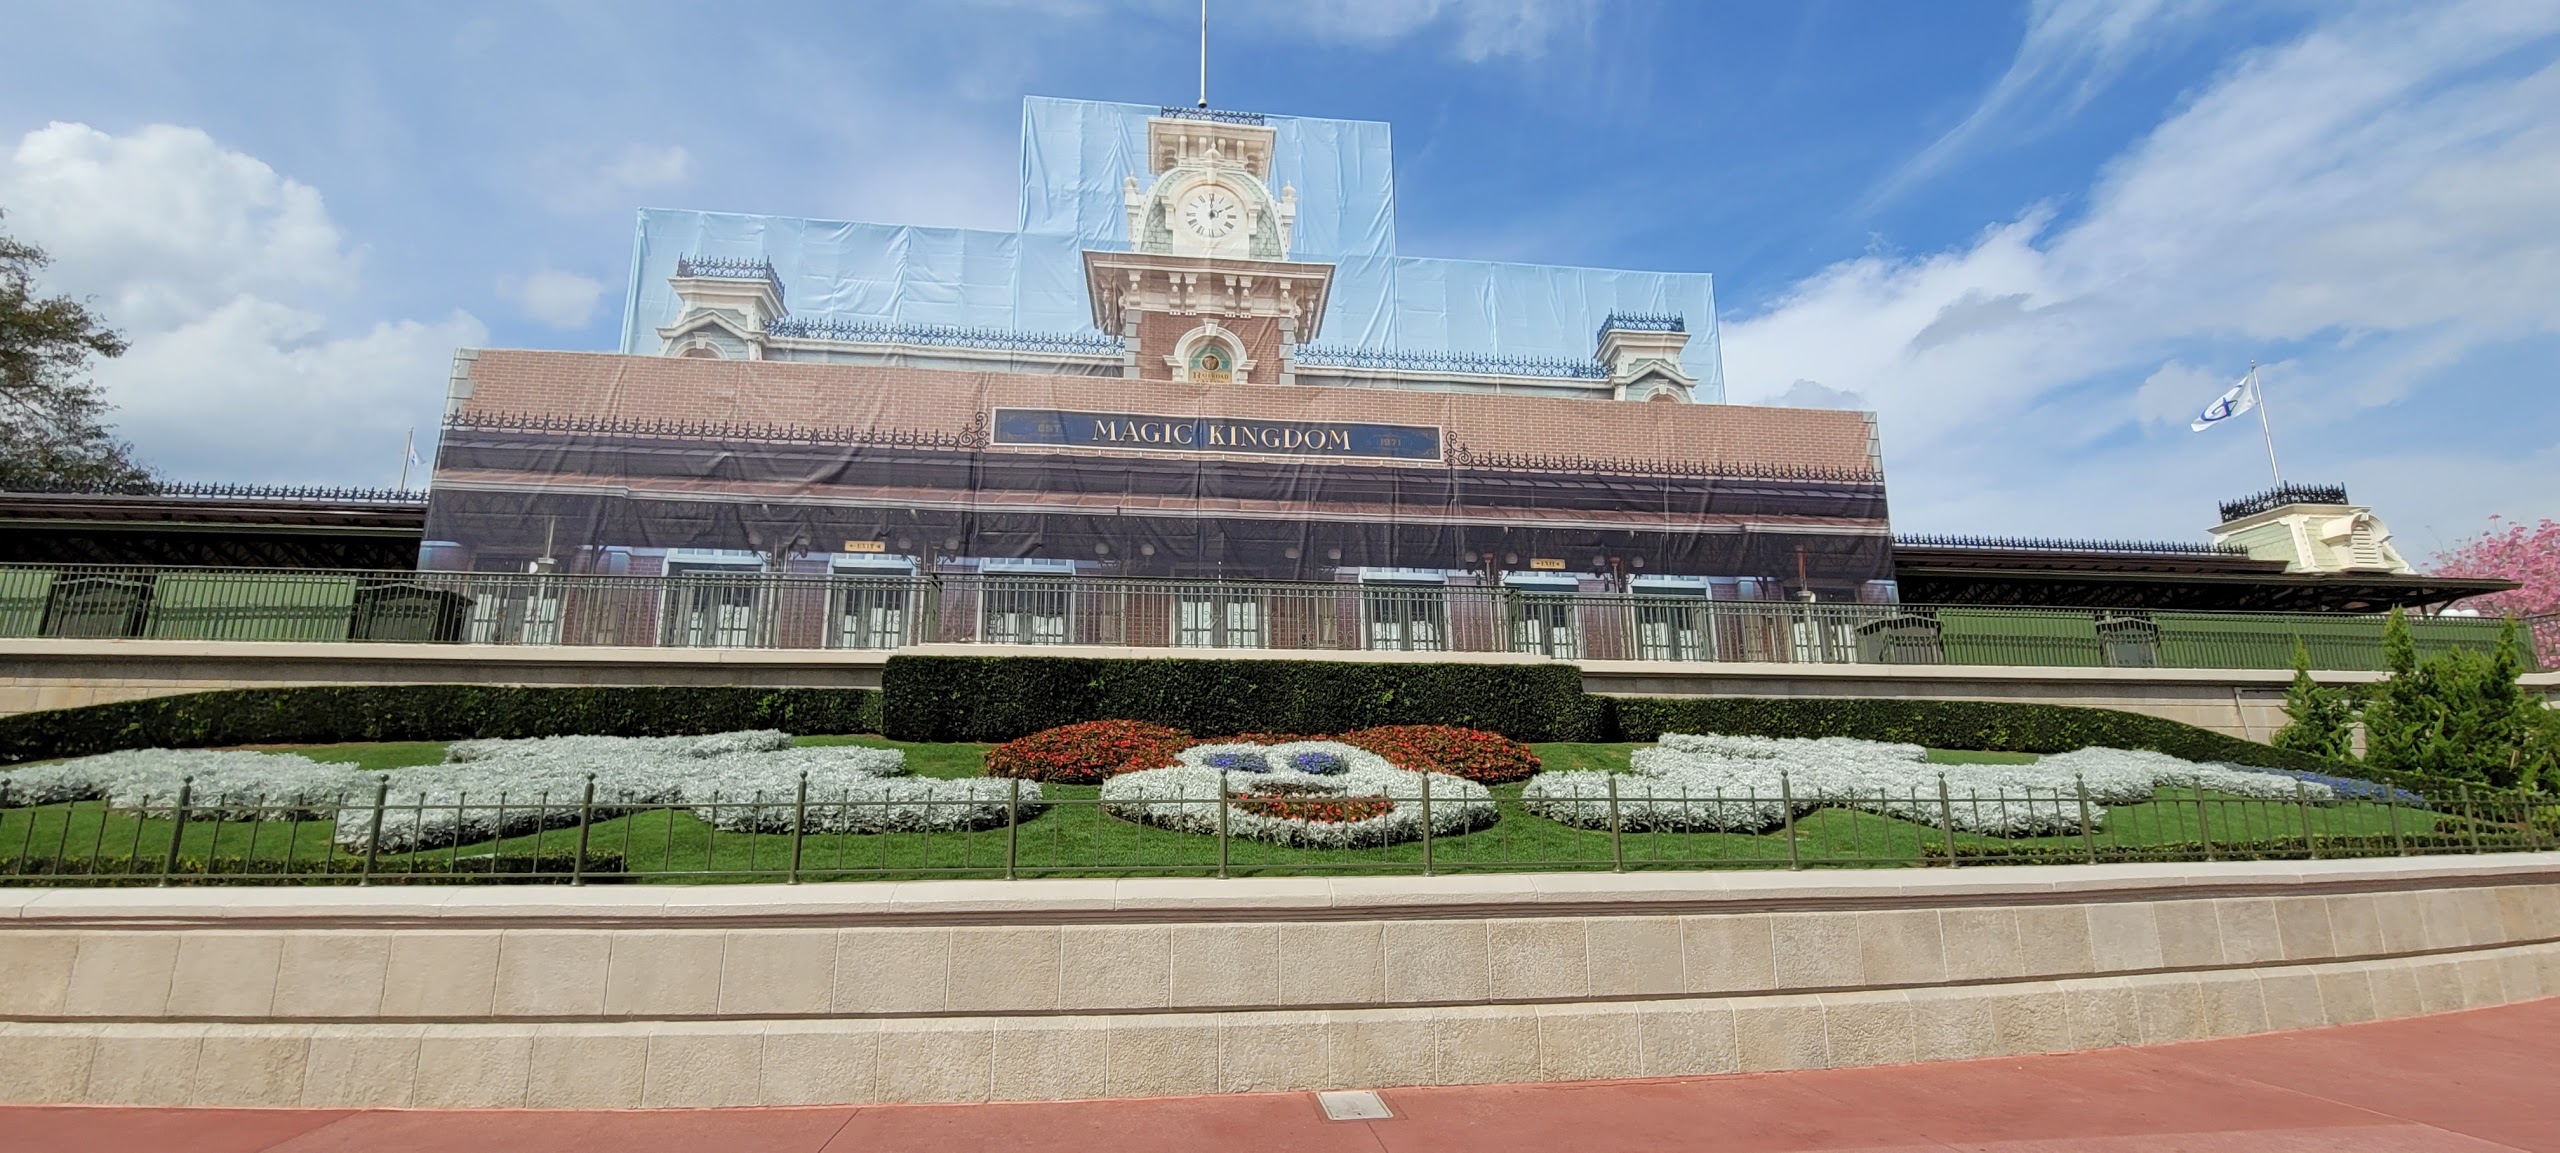 Magic Kingdom testing Facial Recognition for theme park entry